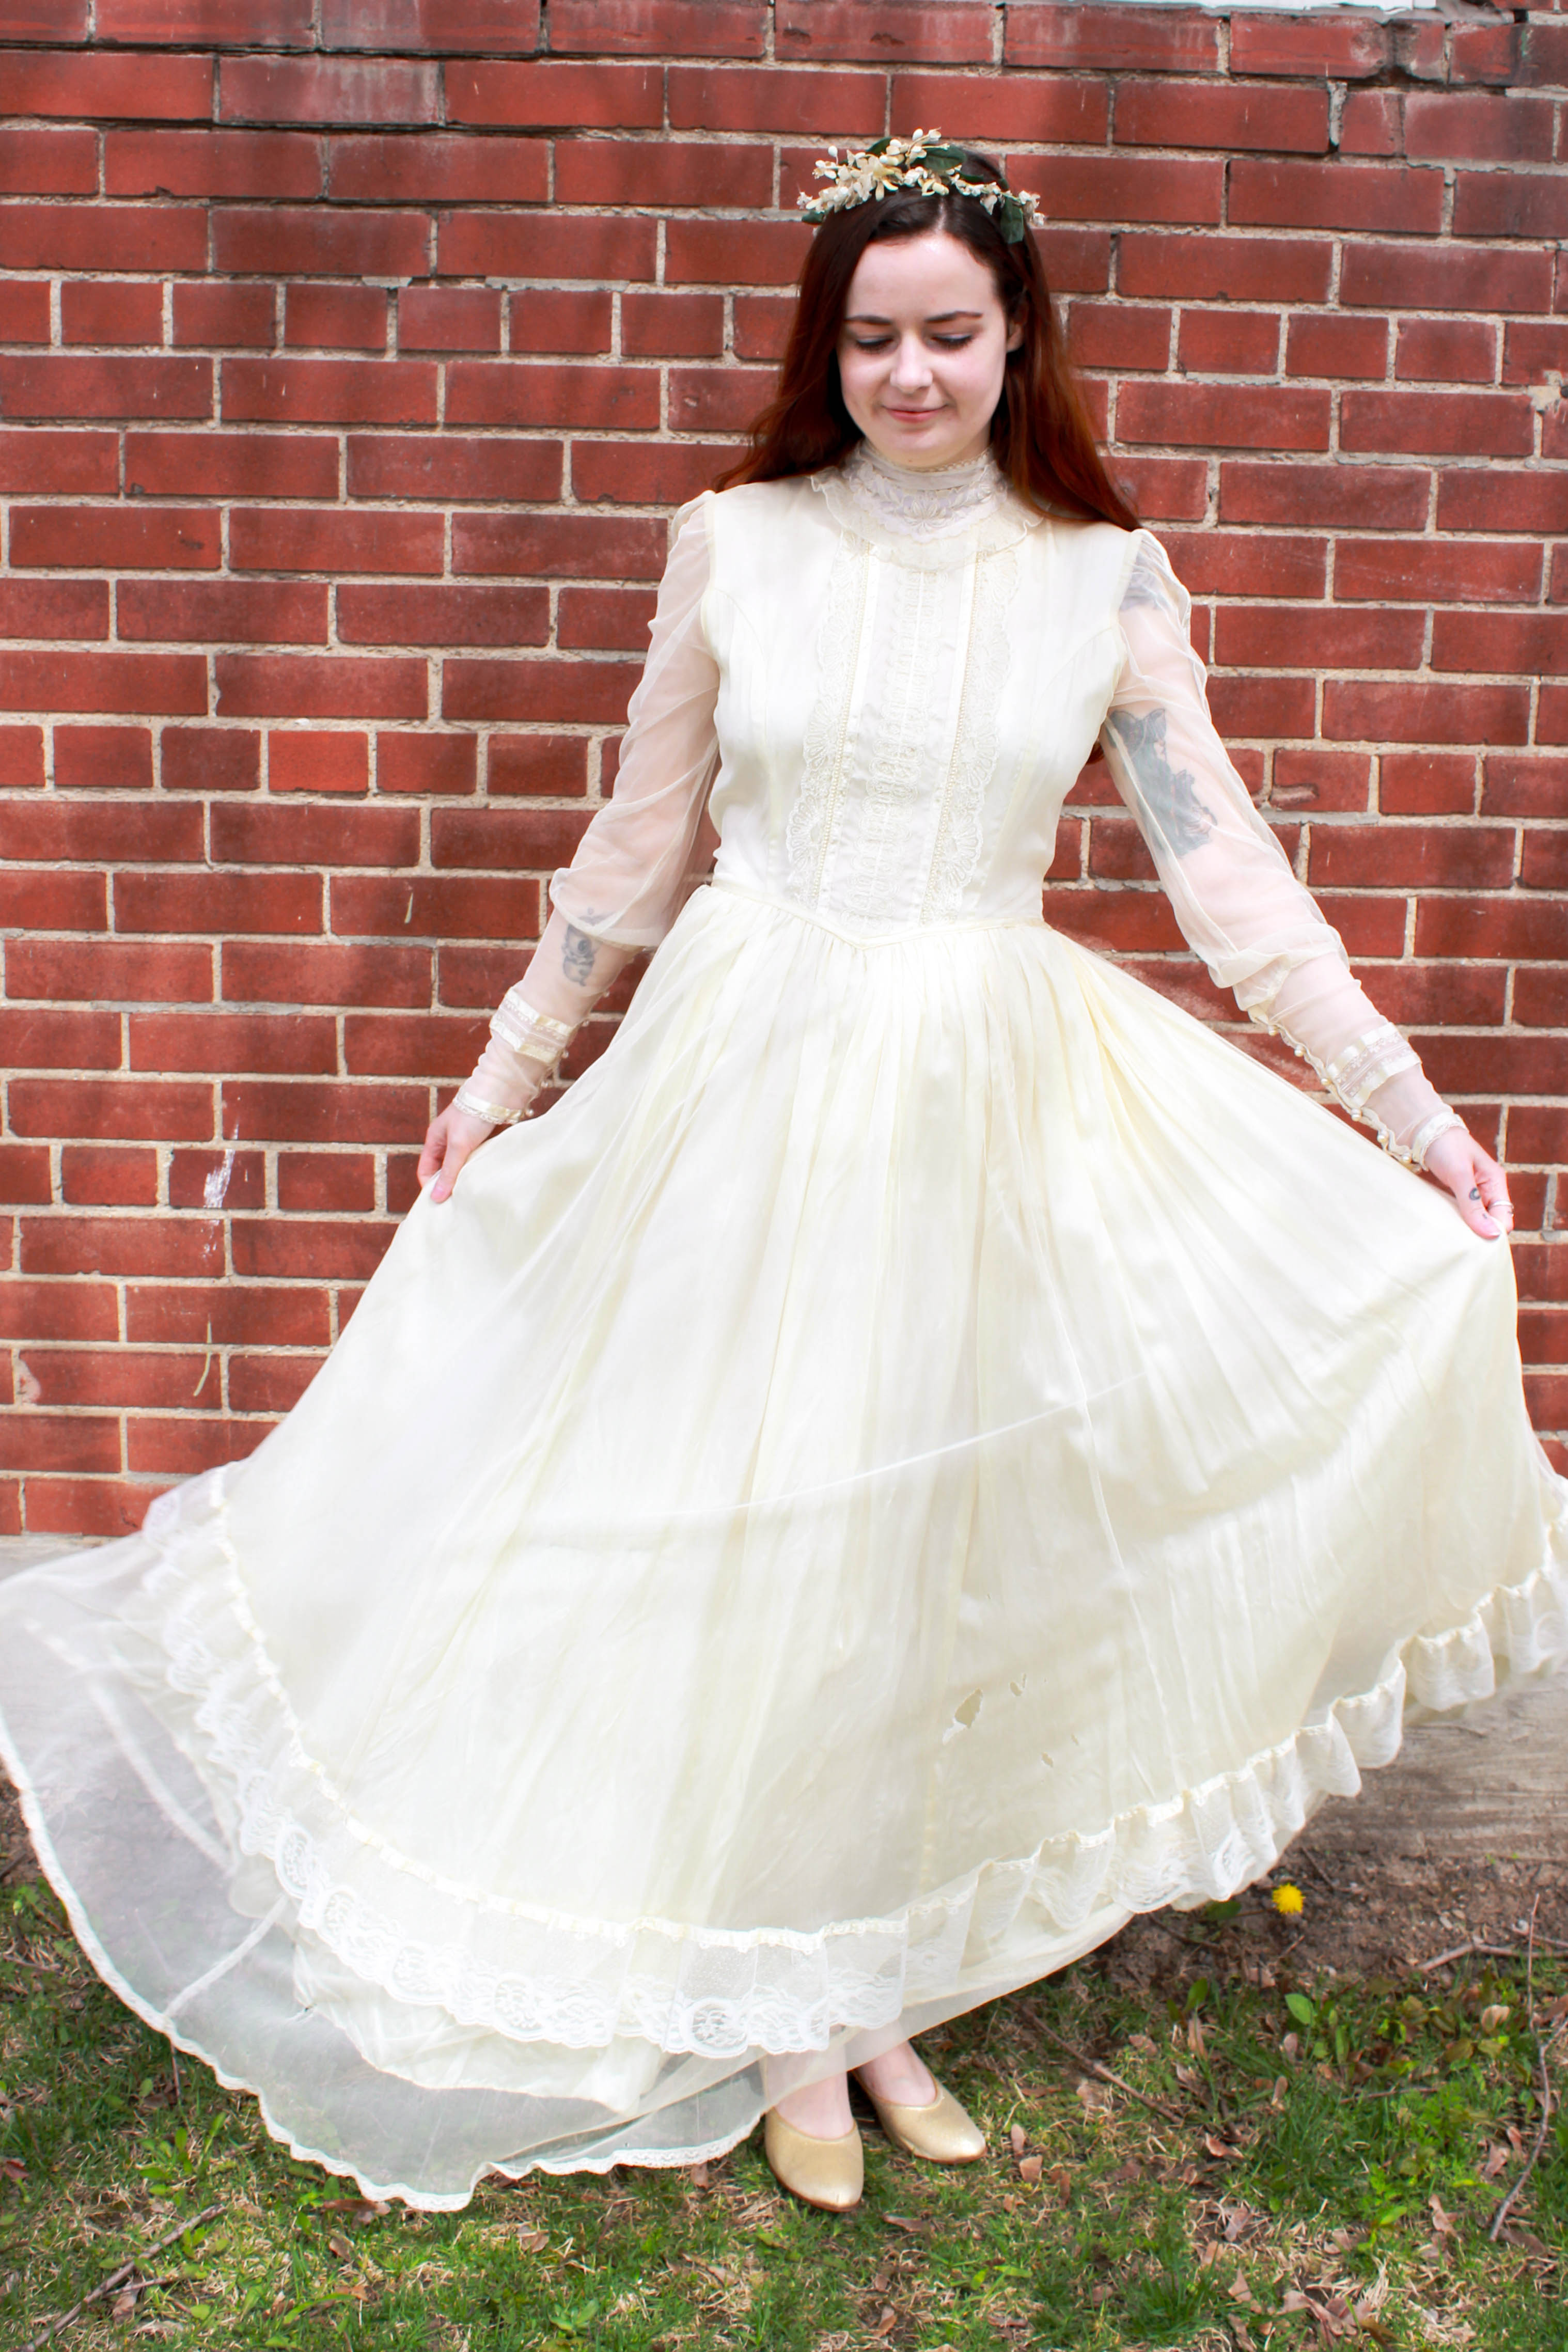 11 '70s-inspired wedding gowns for the bride who's just plain groovy